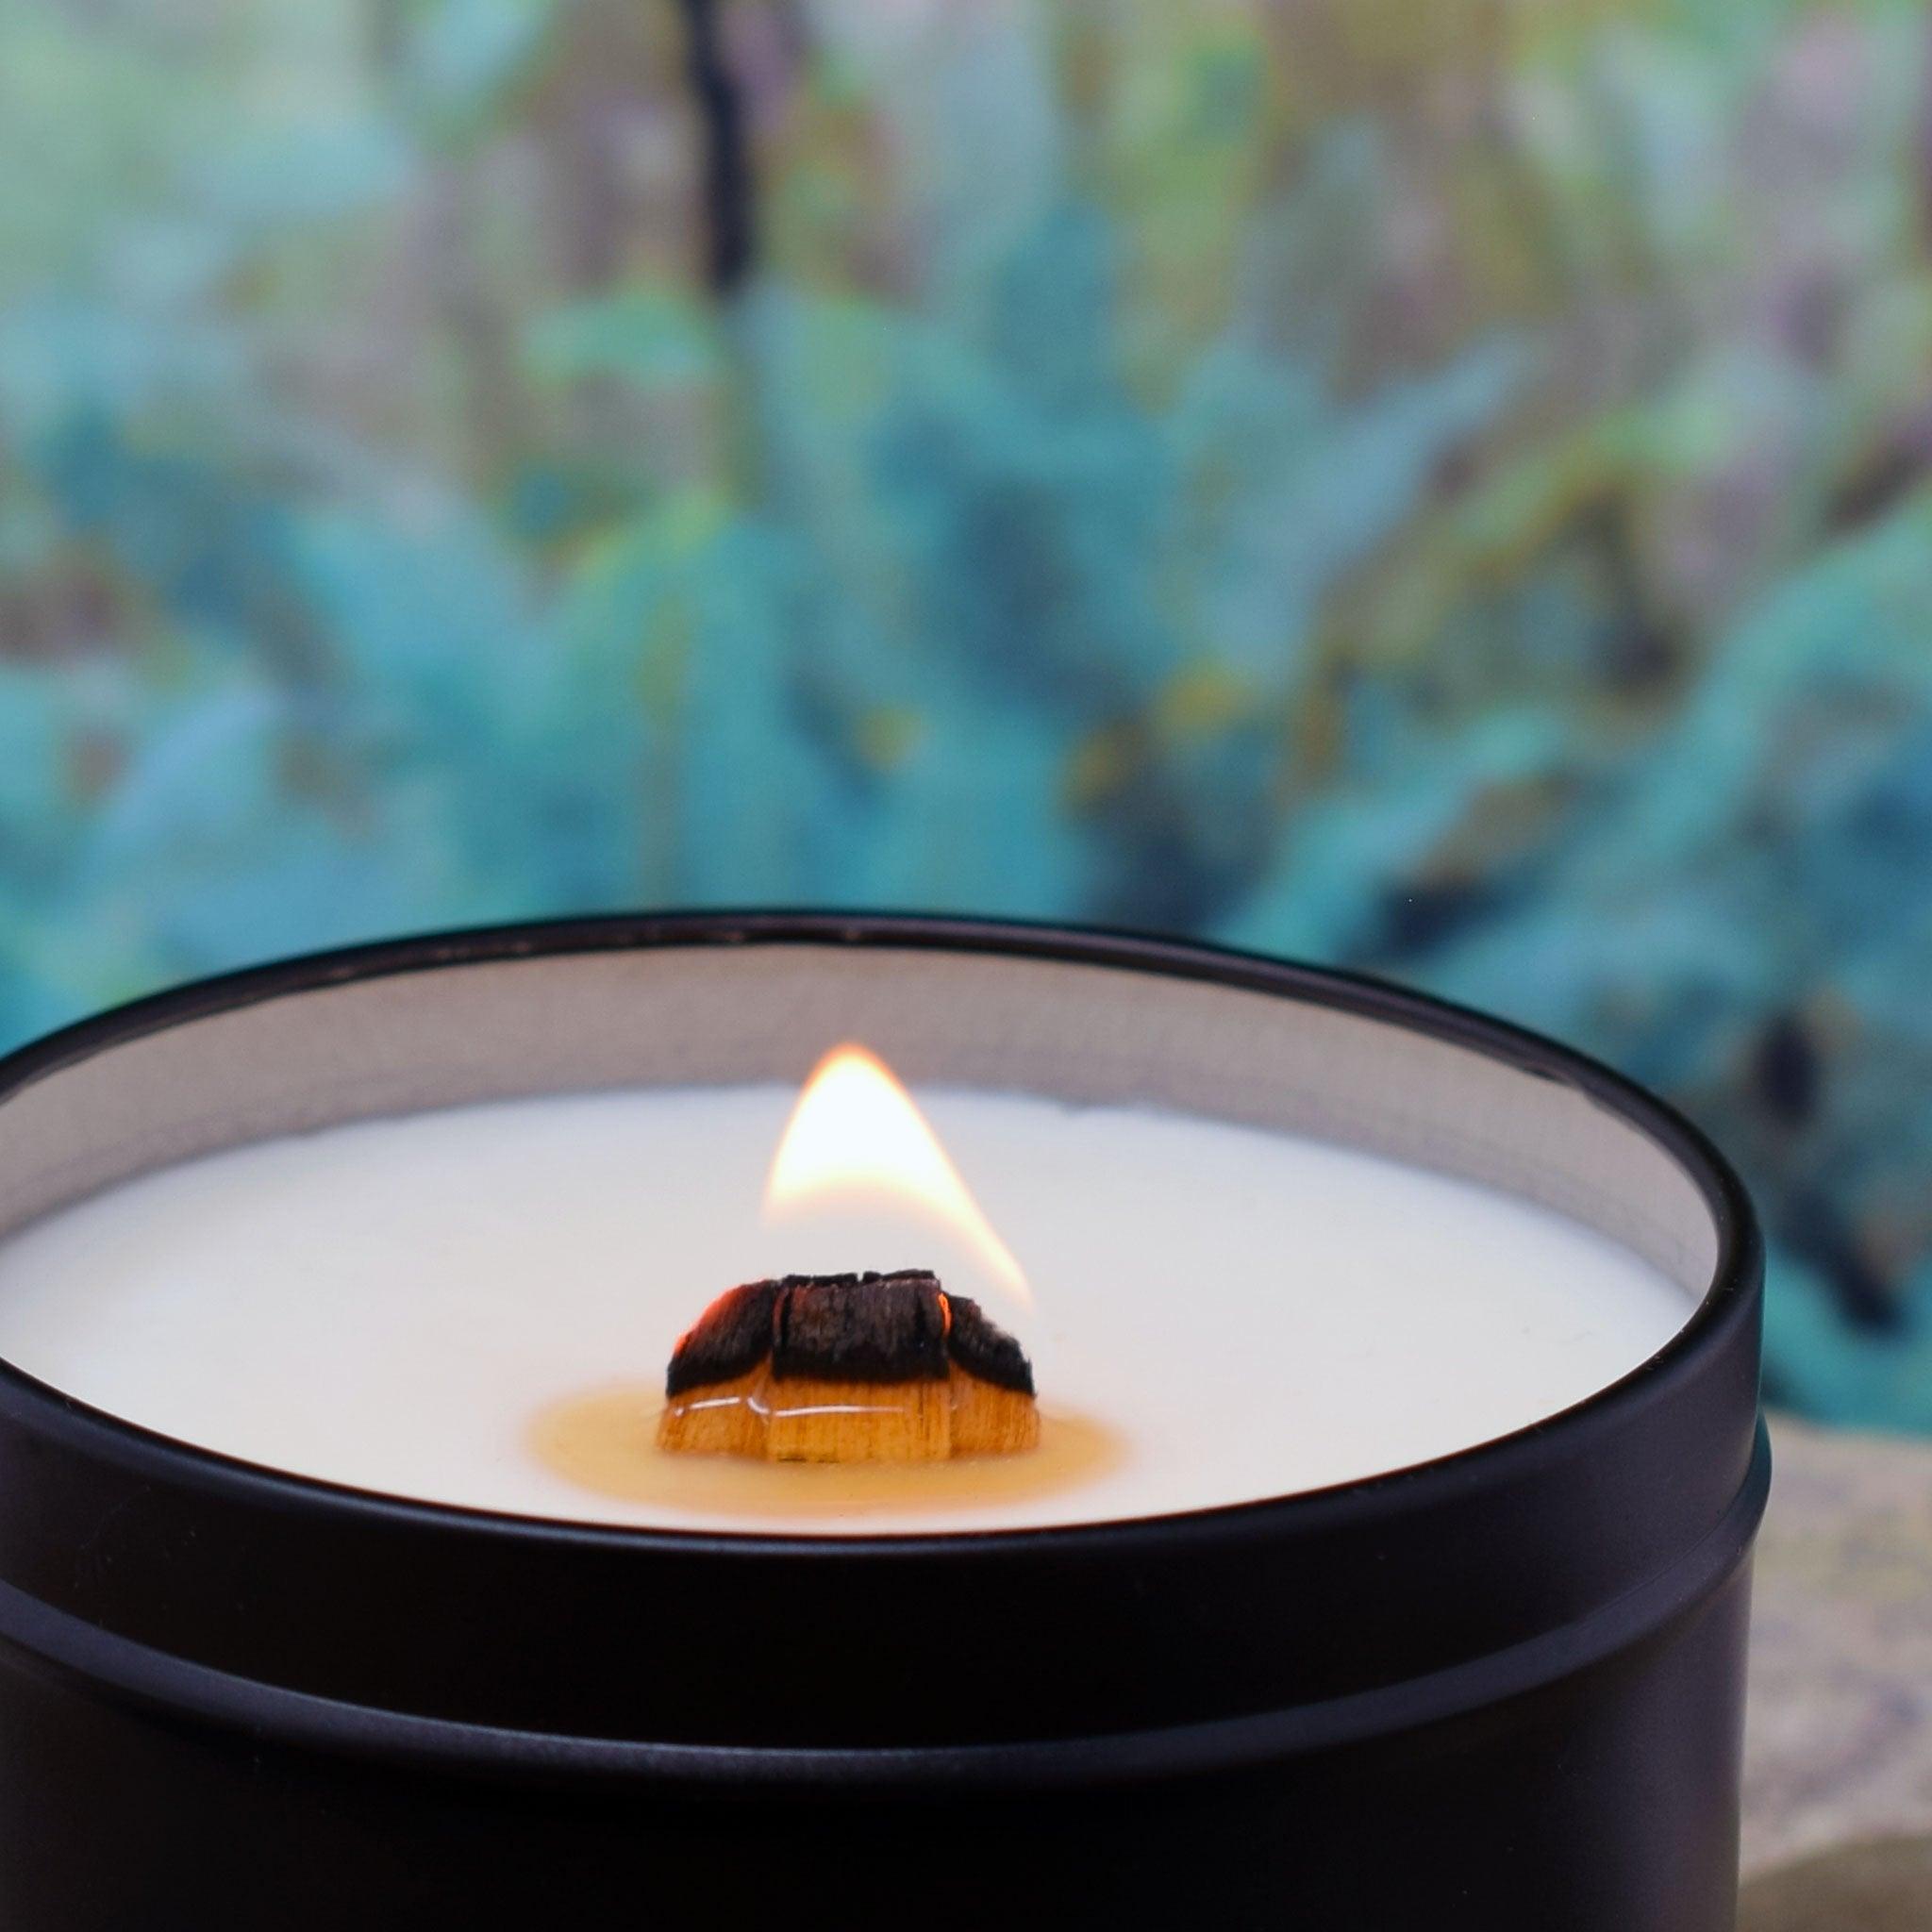 Citronella S'mores Candle, Soy/Beeswax Blend, Wood Wick, 6oz Black Tin - Candeo Candle